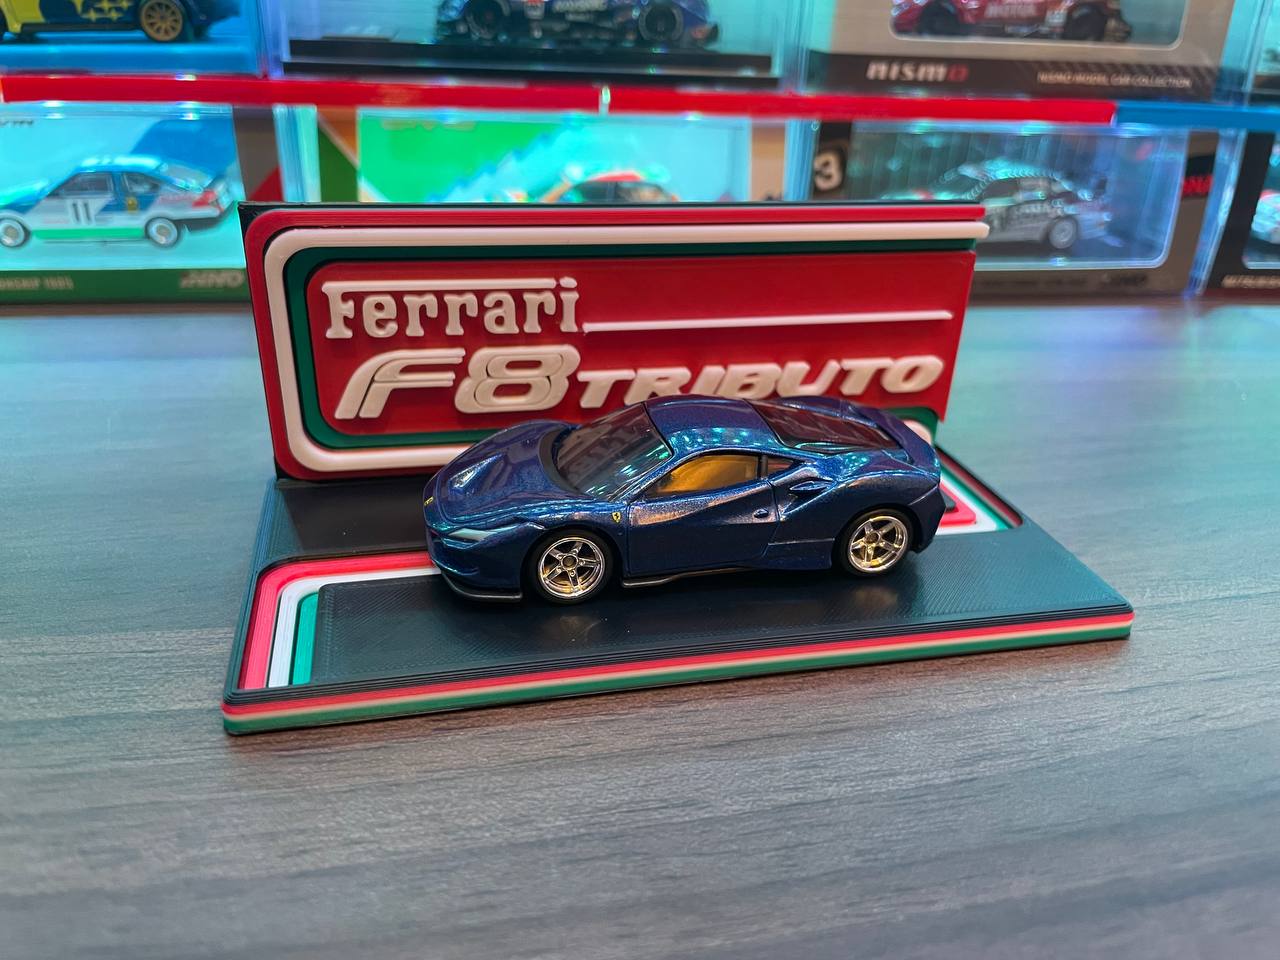 Tomica Ferrari F8 Tributo Display Base by GigaPenguin | Download free ...